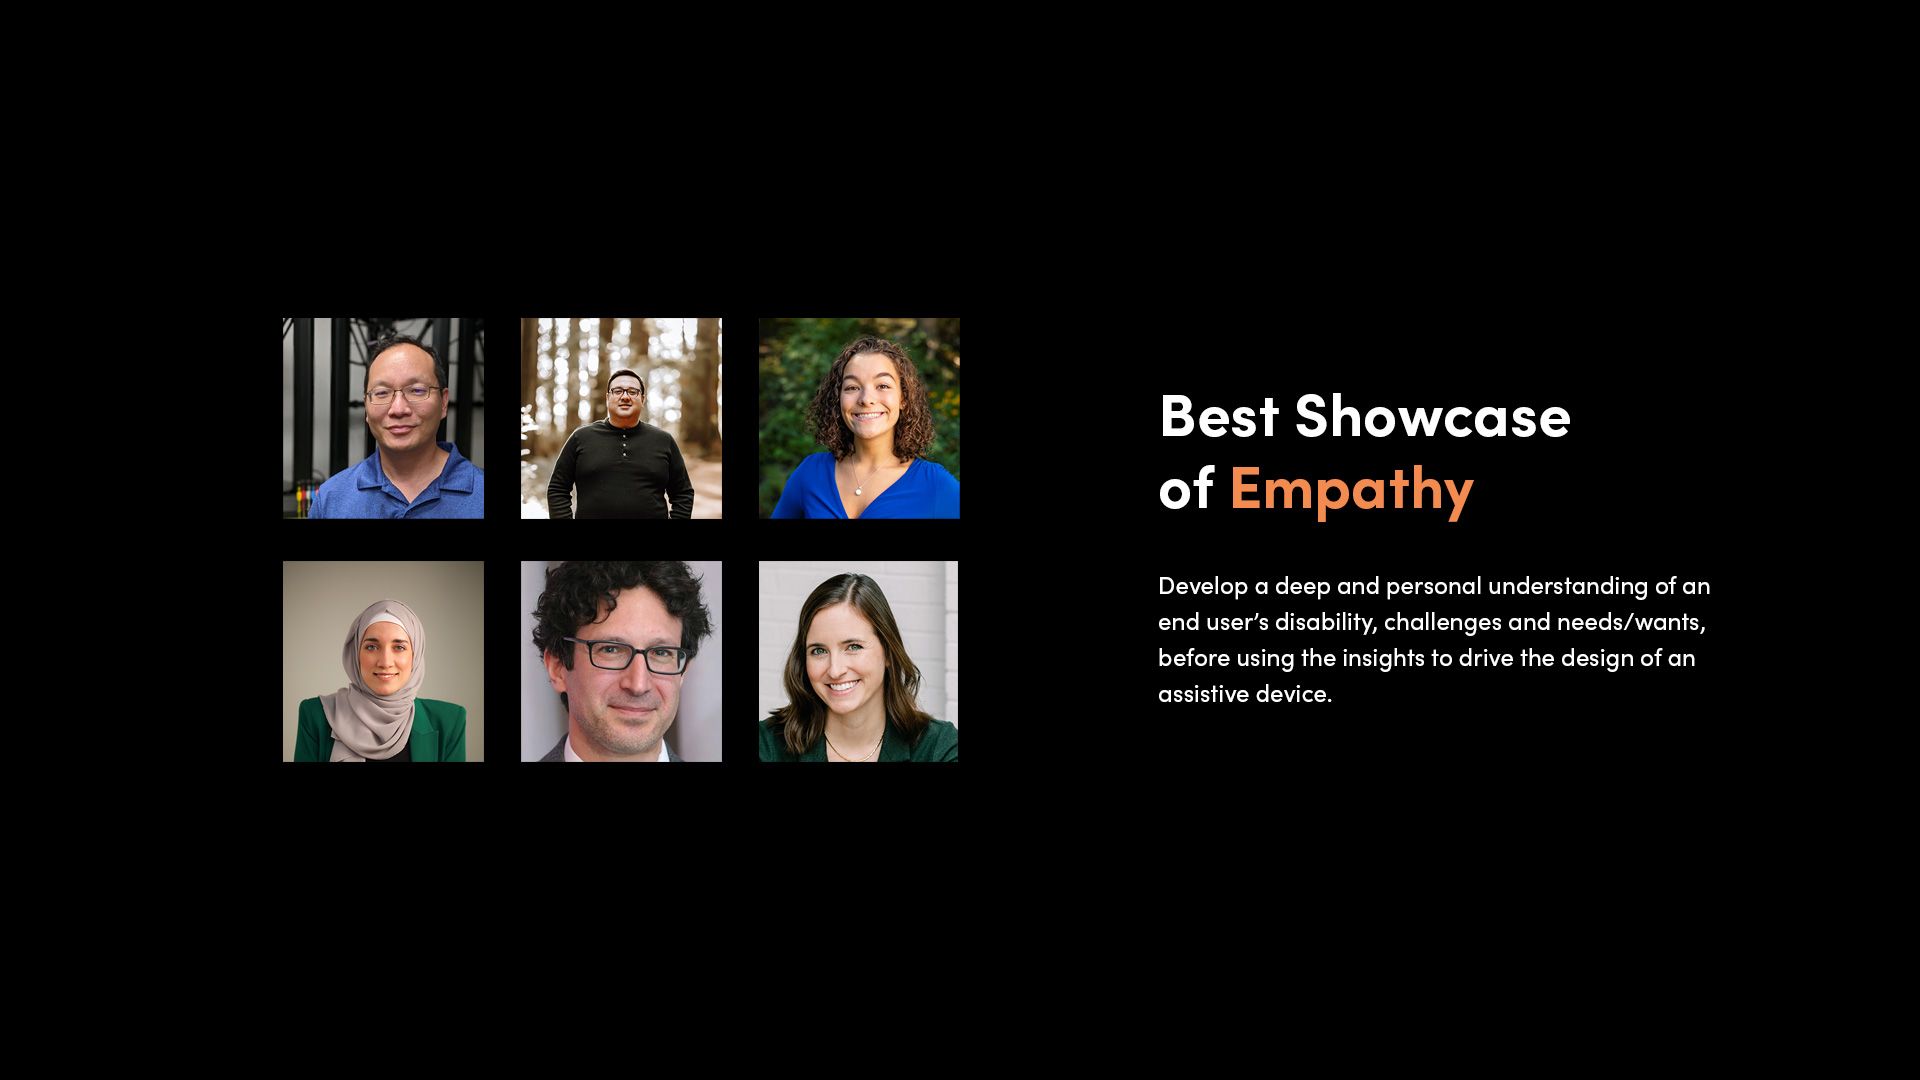 Collage of headshots showing the Empathy judging panel for the Make:able Challenge.